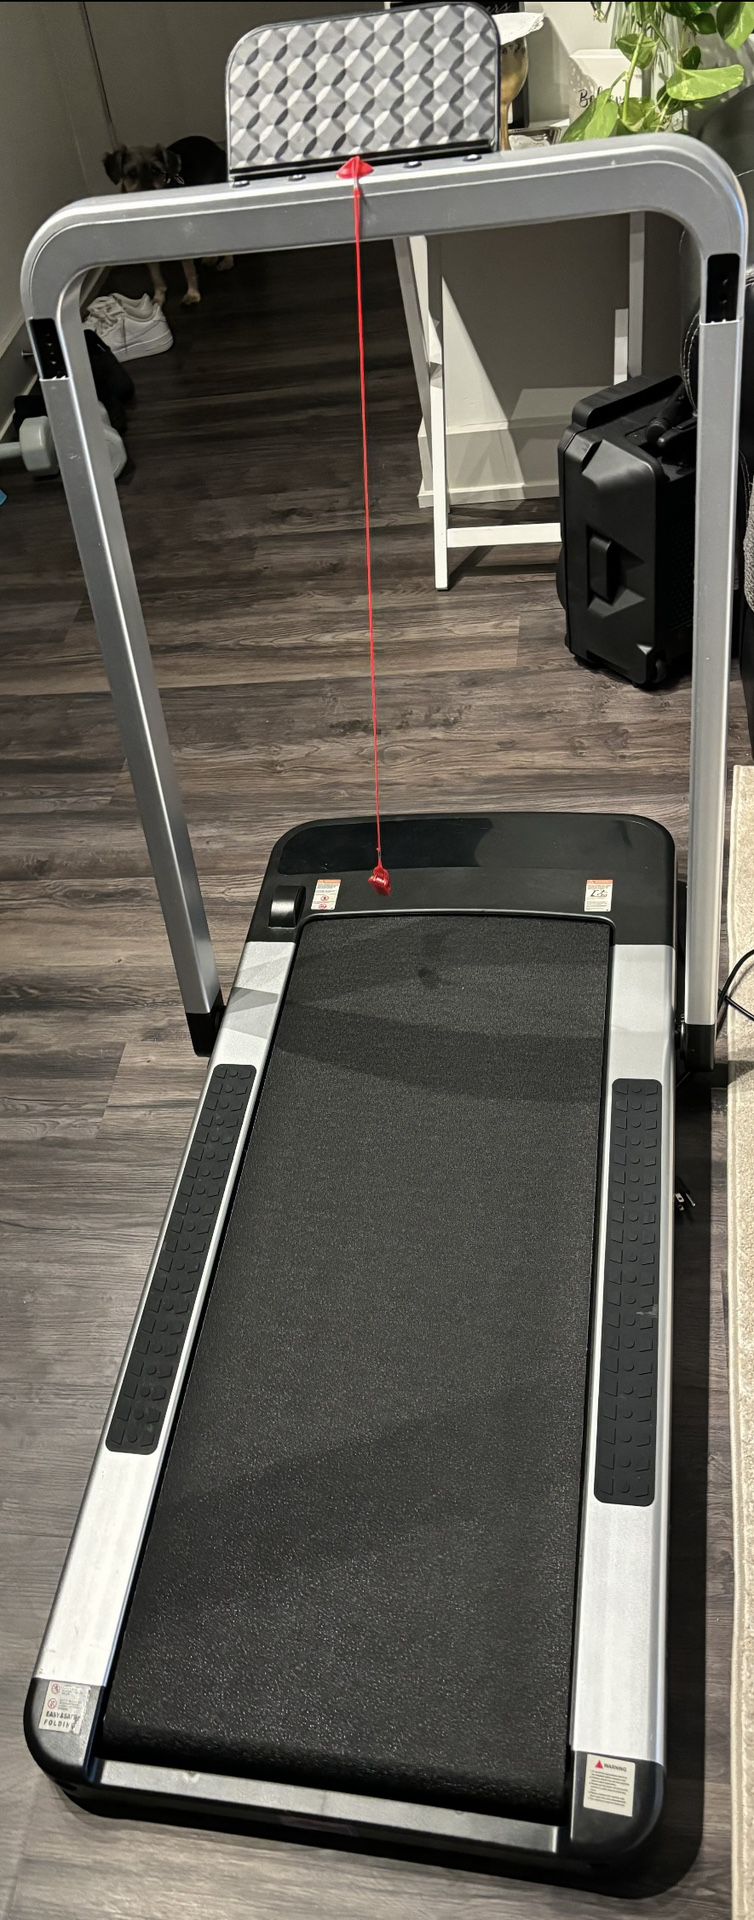 Ancheer Folding/portable Treadmill For Home/office